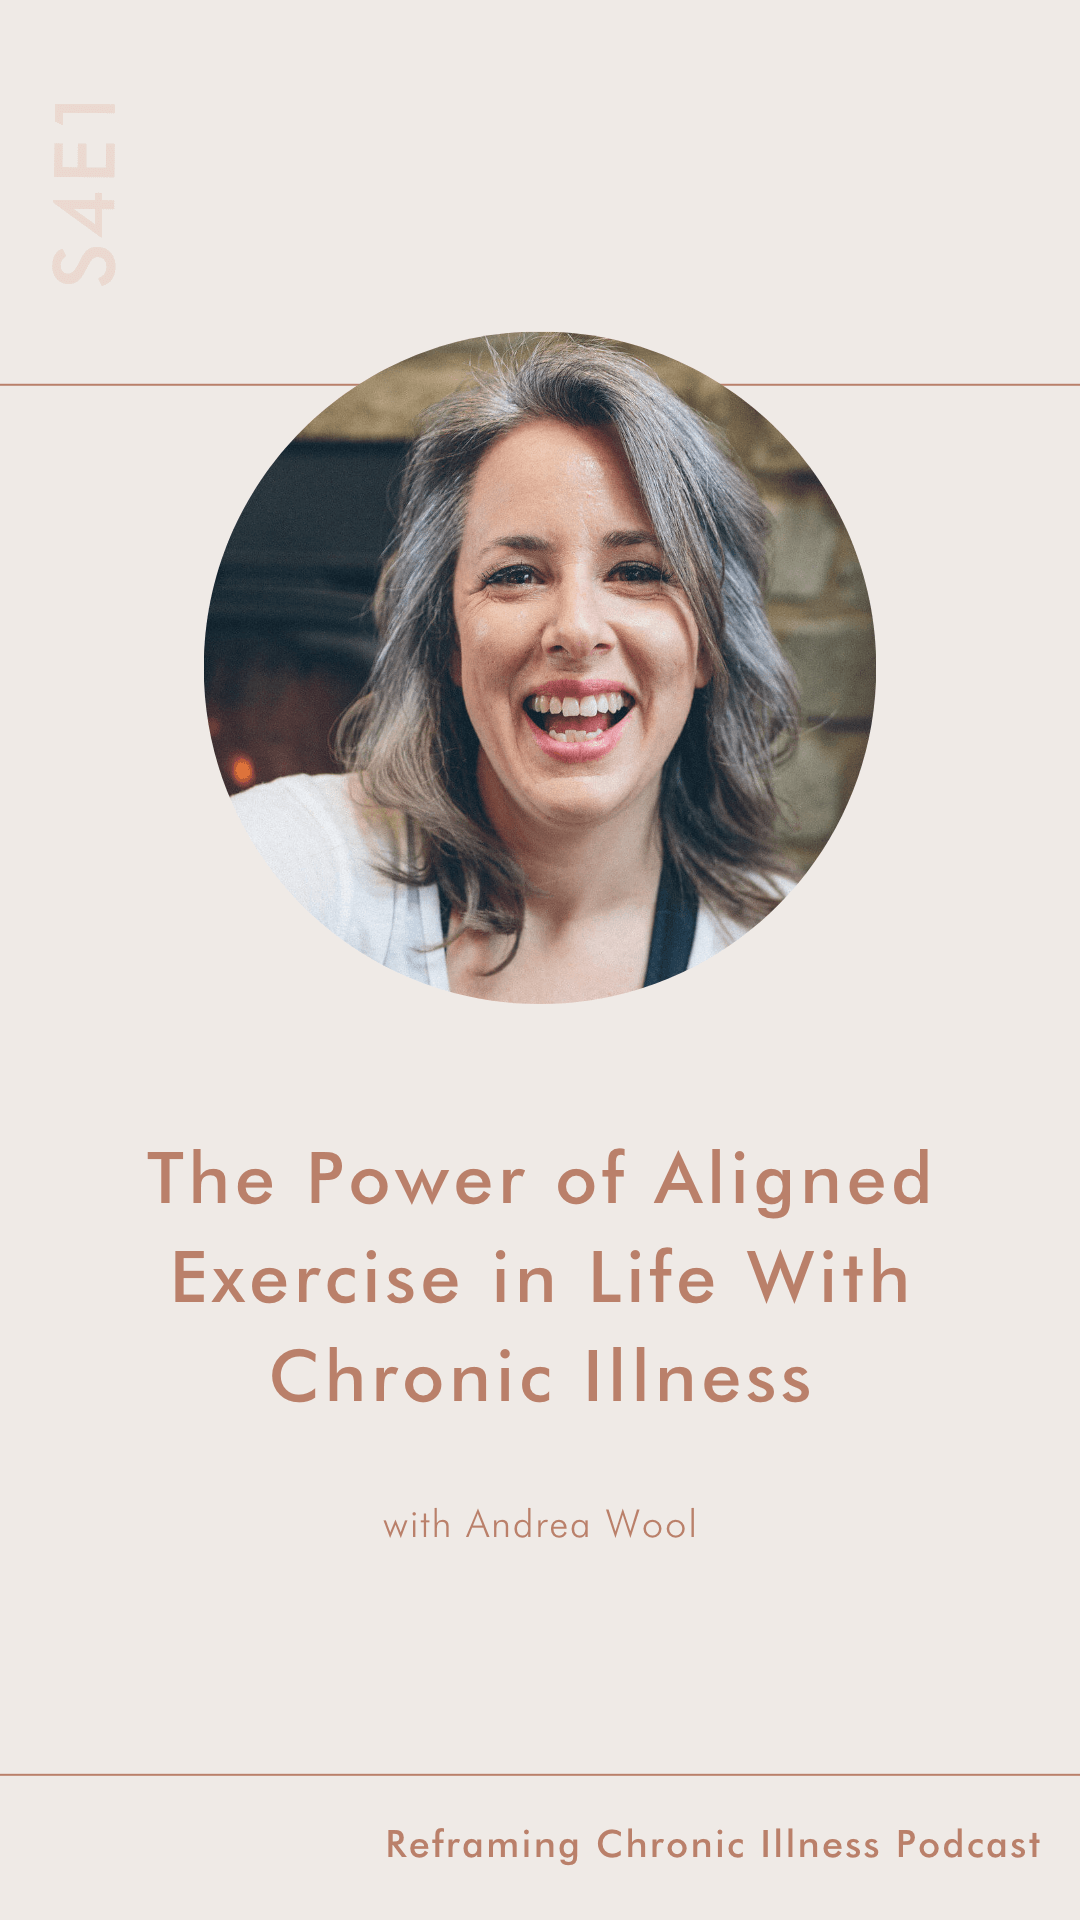 Andrea Wool Autoimmune Strong - Alana Holloway Chronic Illness Coach - Reframing Chronic Illness Podcast - The Power of Aligned Exercise.png